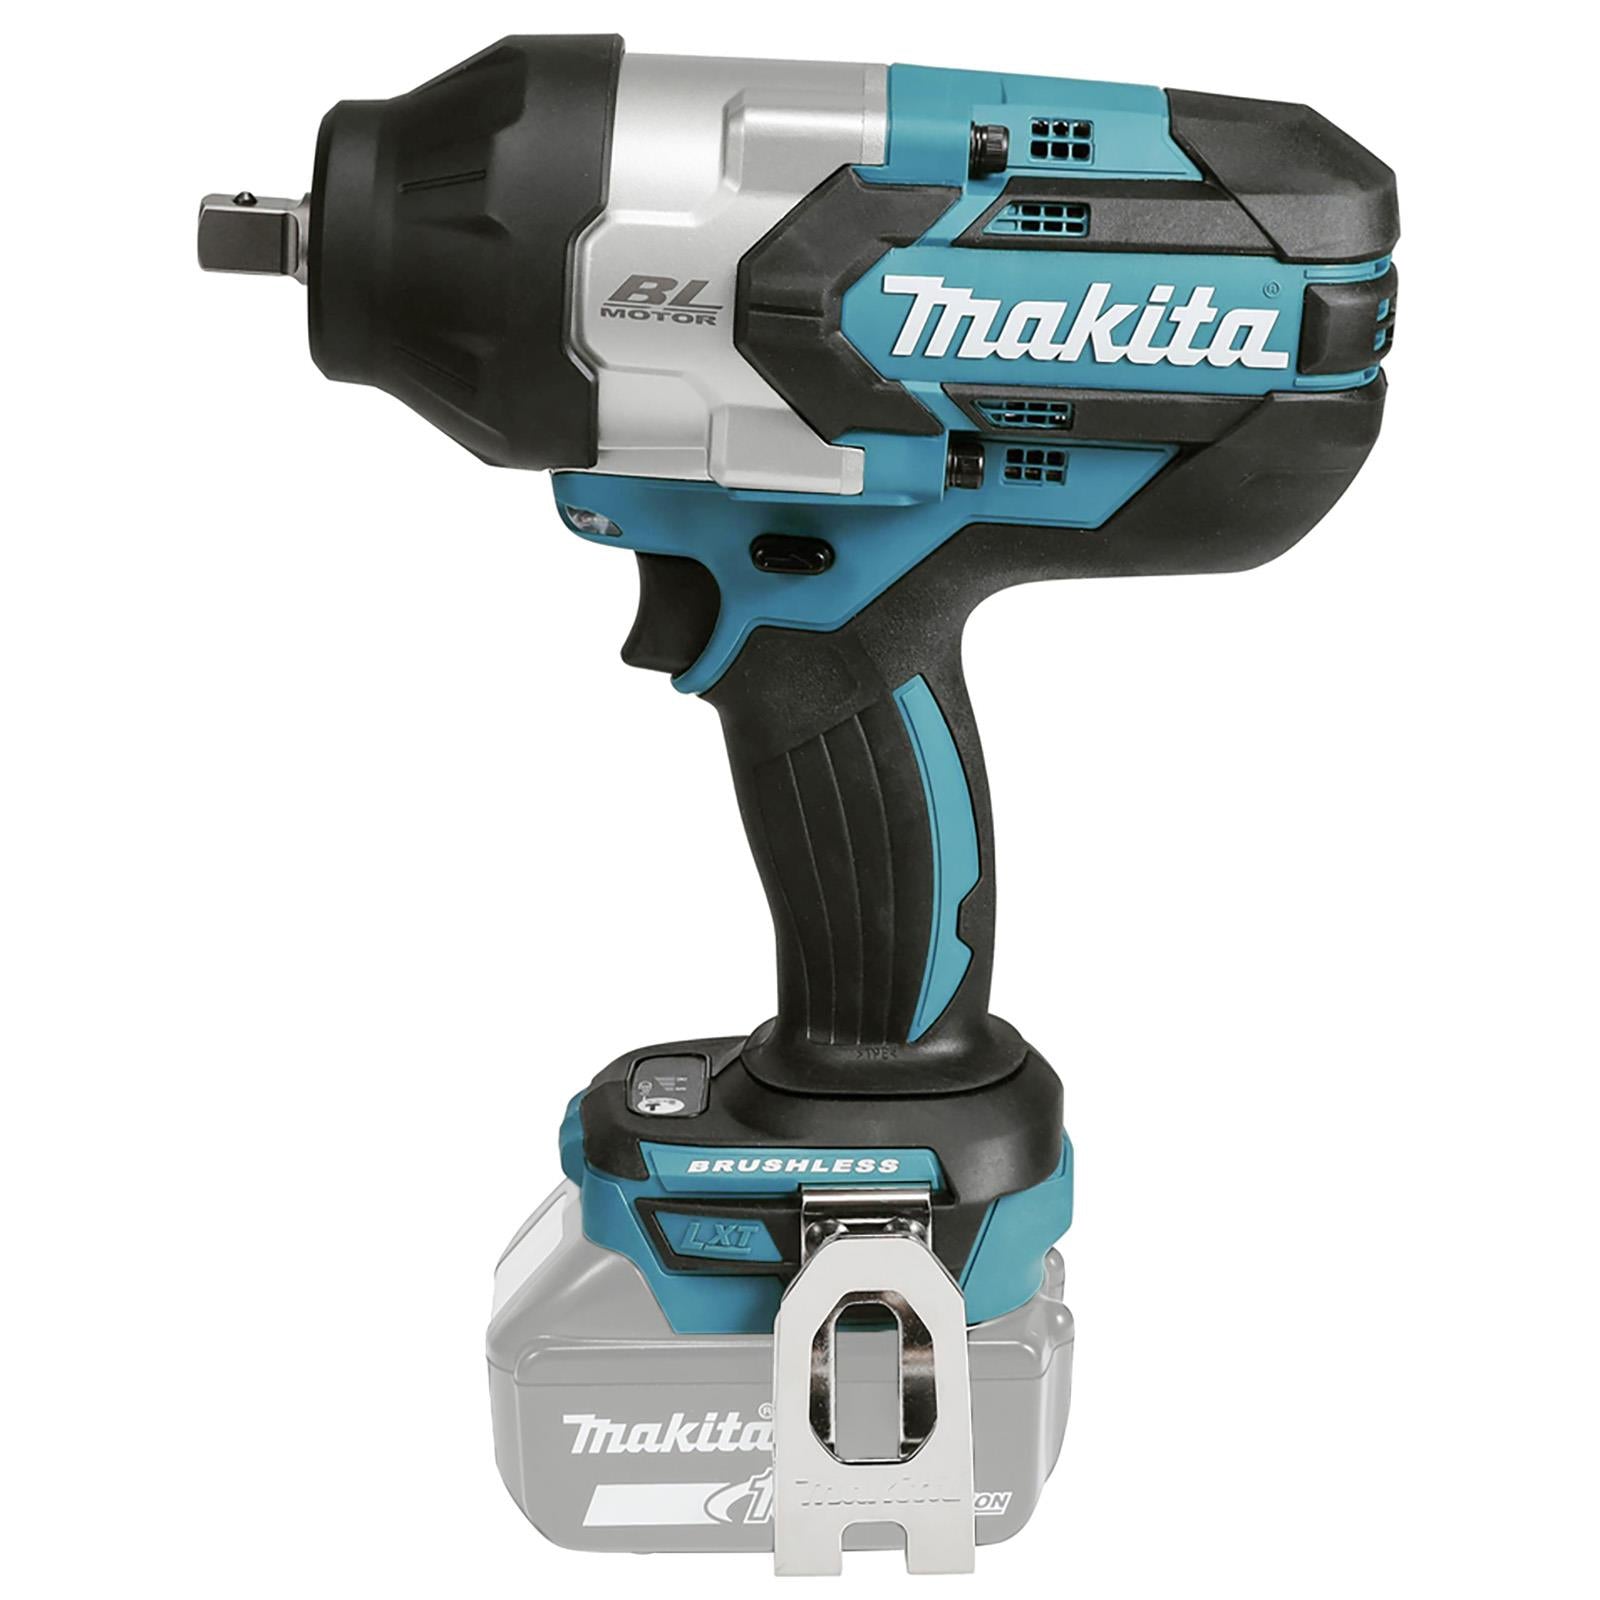 Makita Impact Wrench 1/2" Drive 18V LXT Brushless Cordless 1050 Nm Bare Unit Body Only DTW1004Z